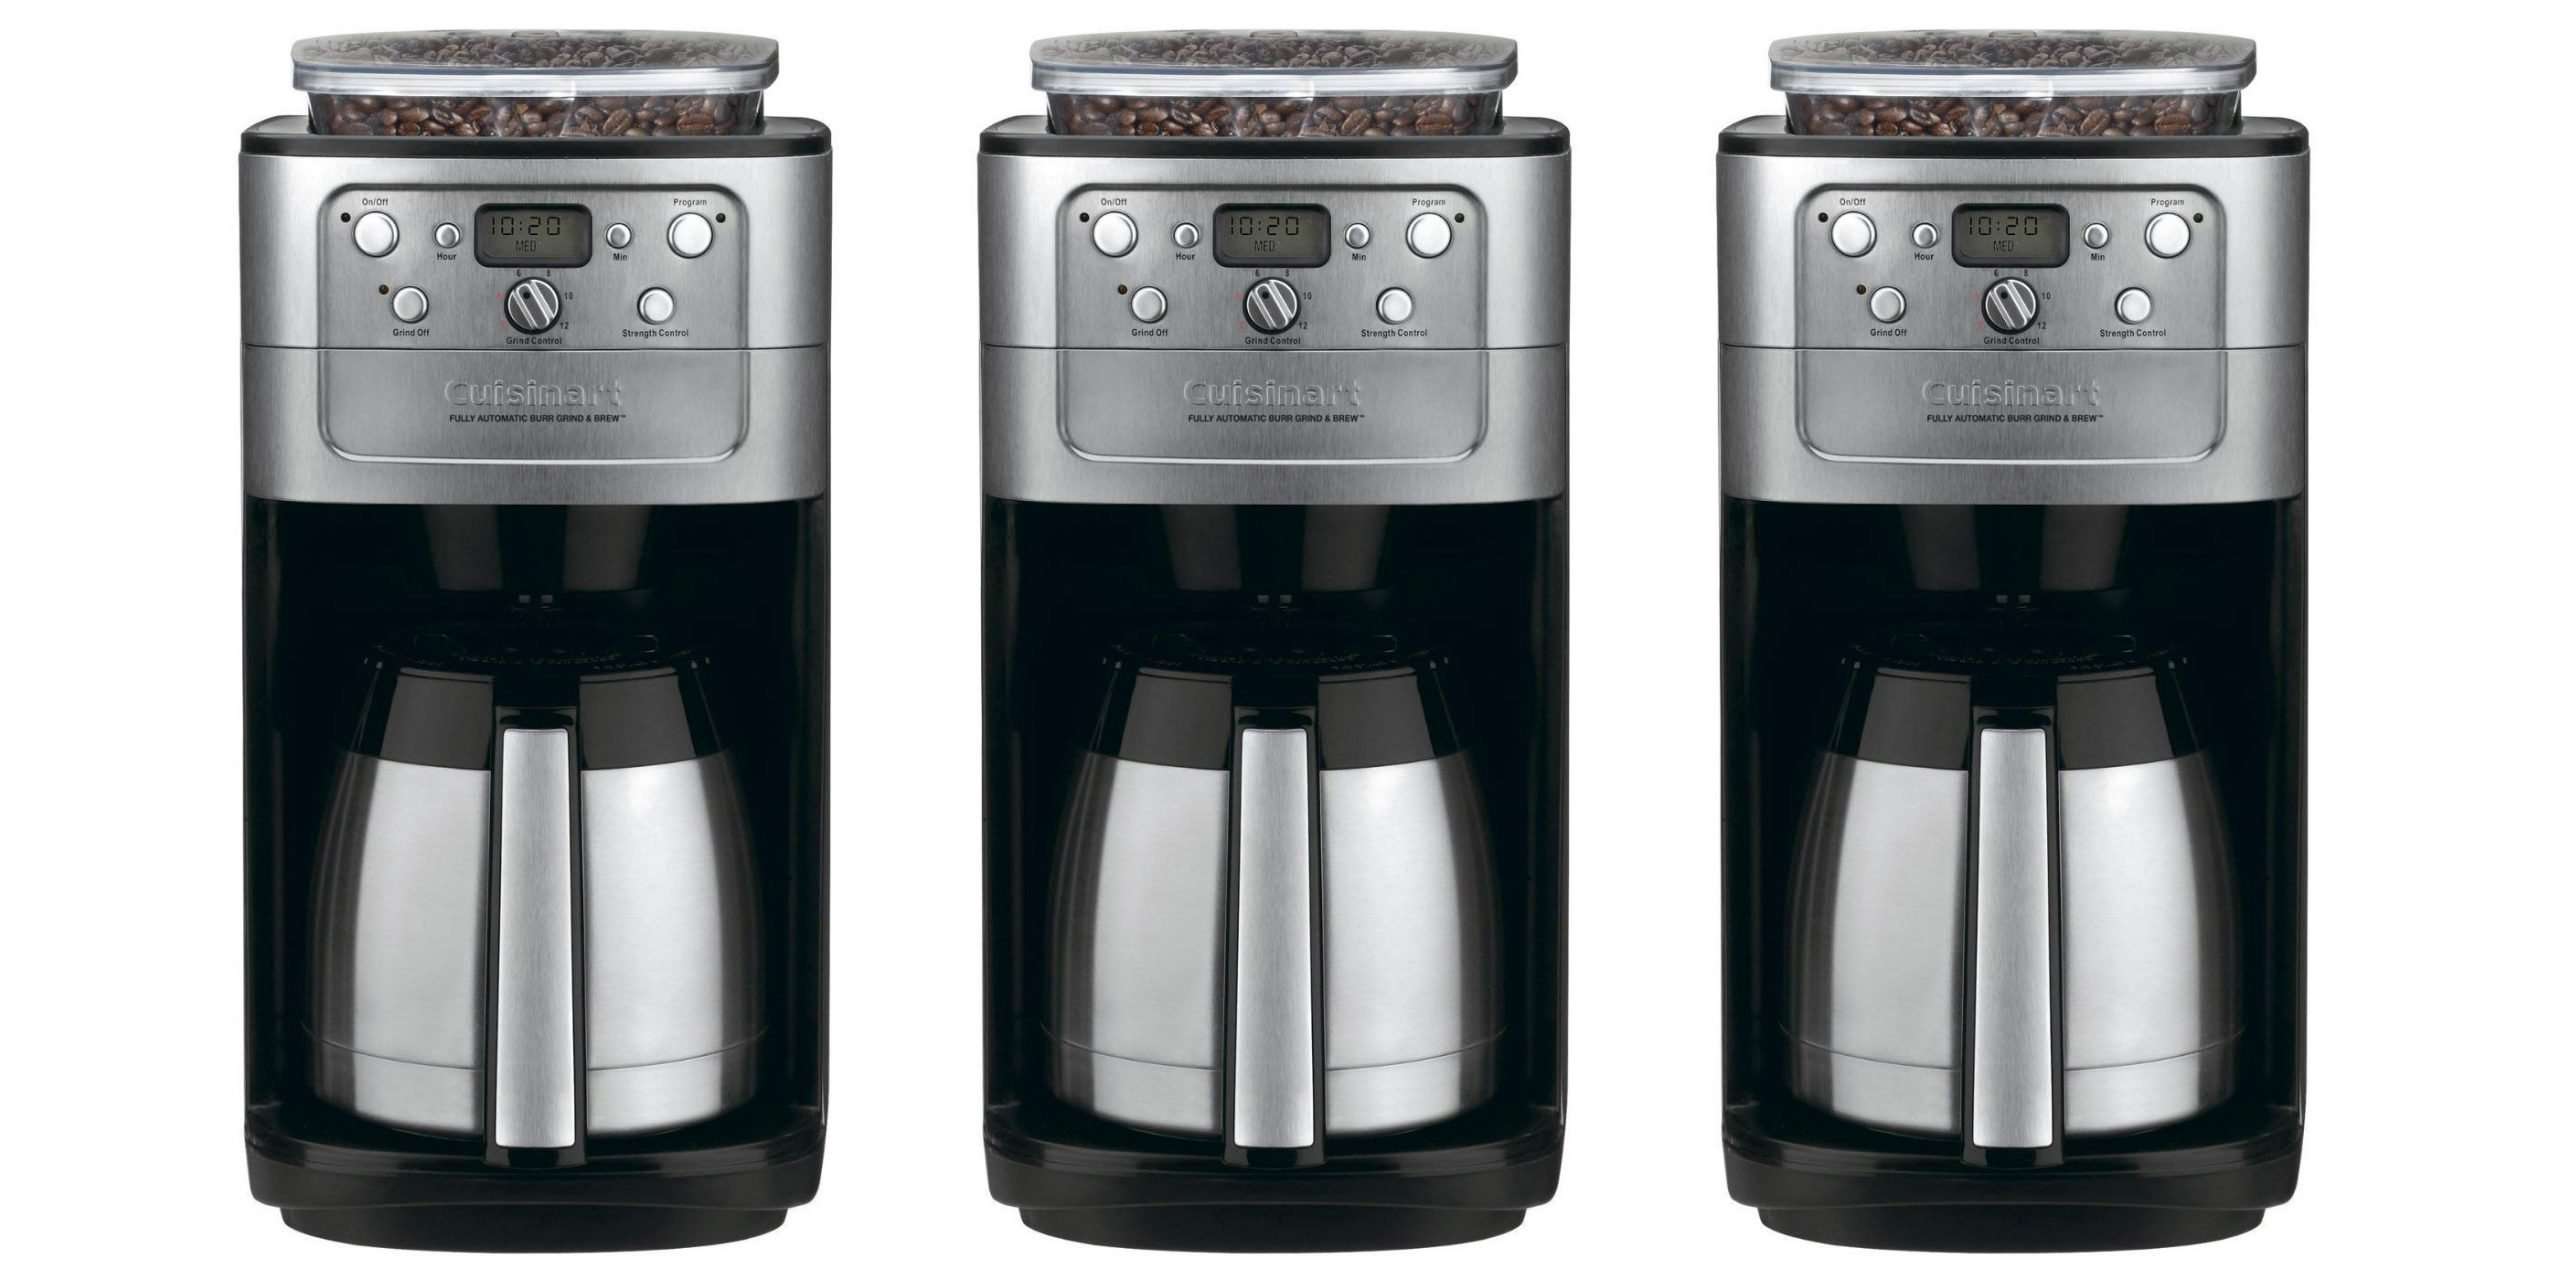 This Cuisinart Coffee Maker grinds and brews whole beans ...